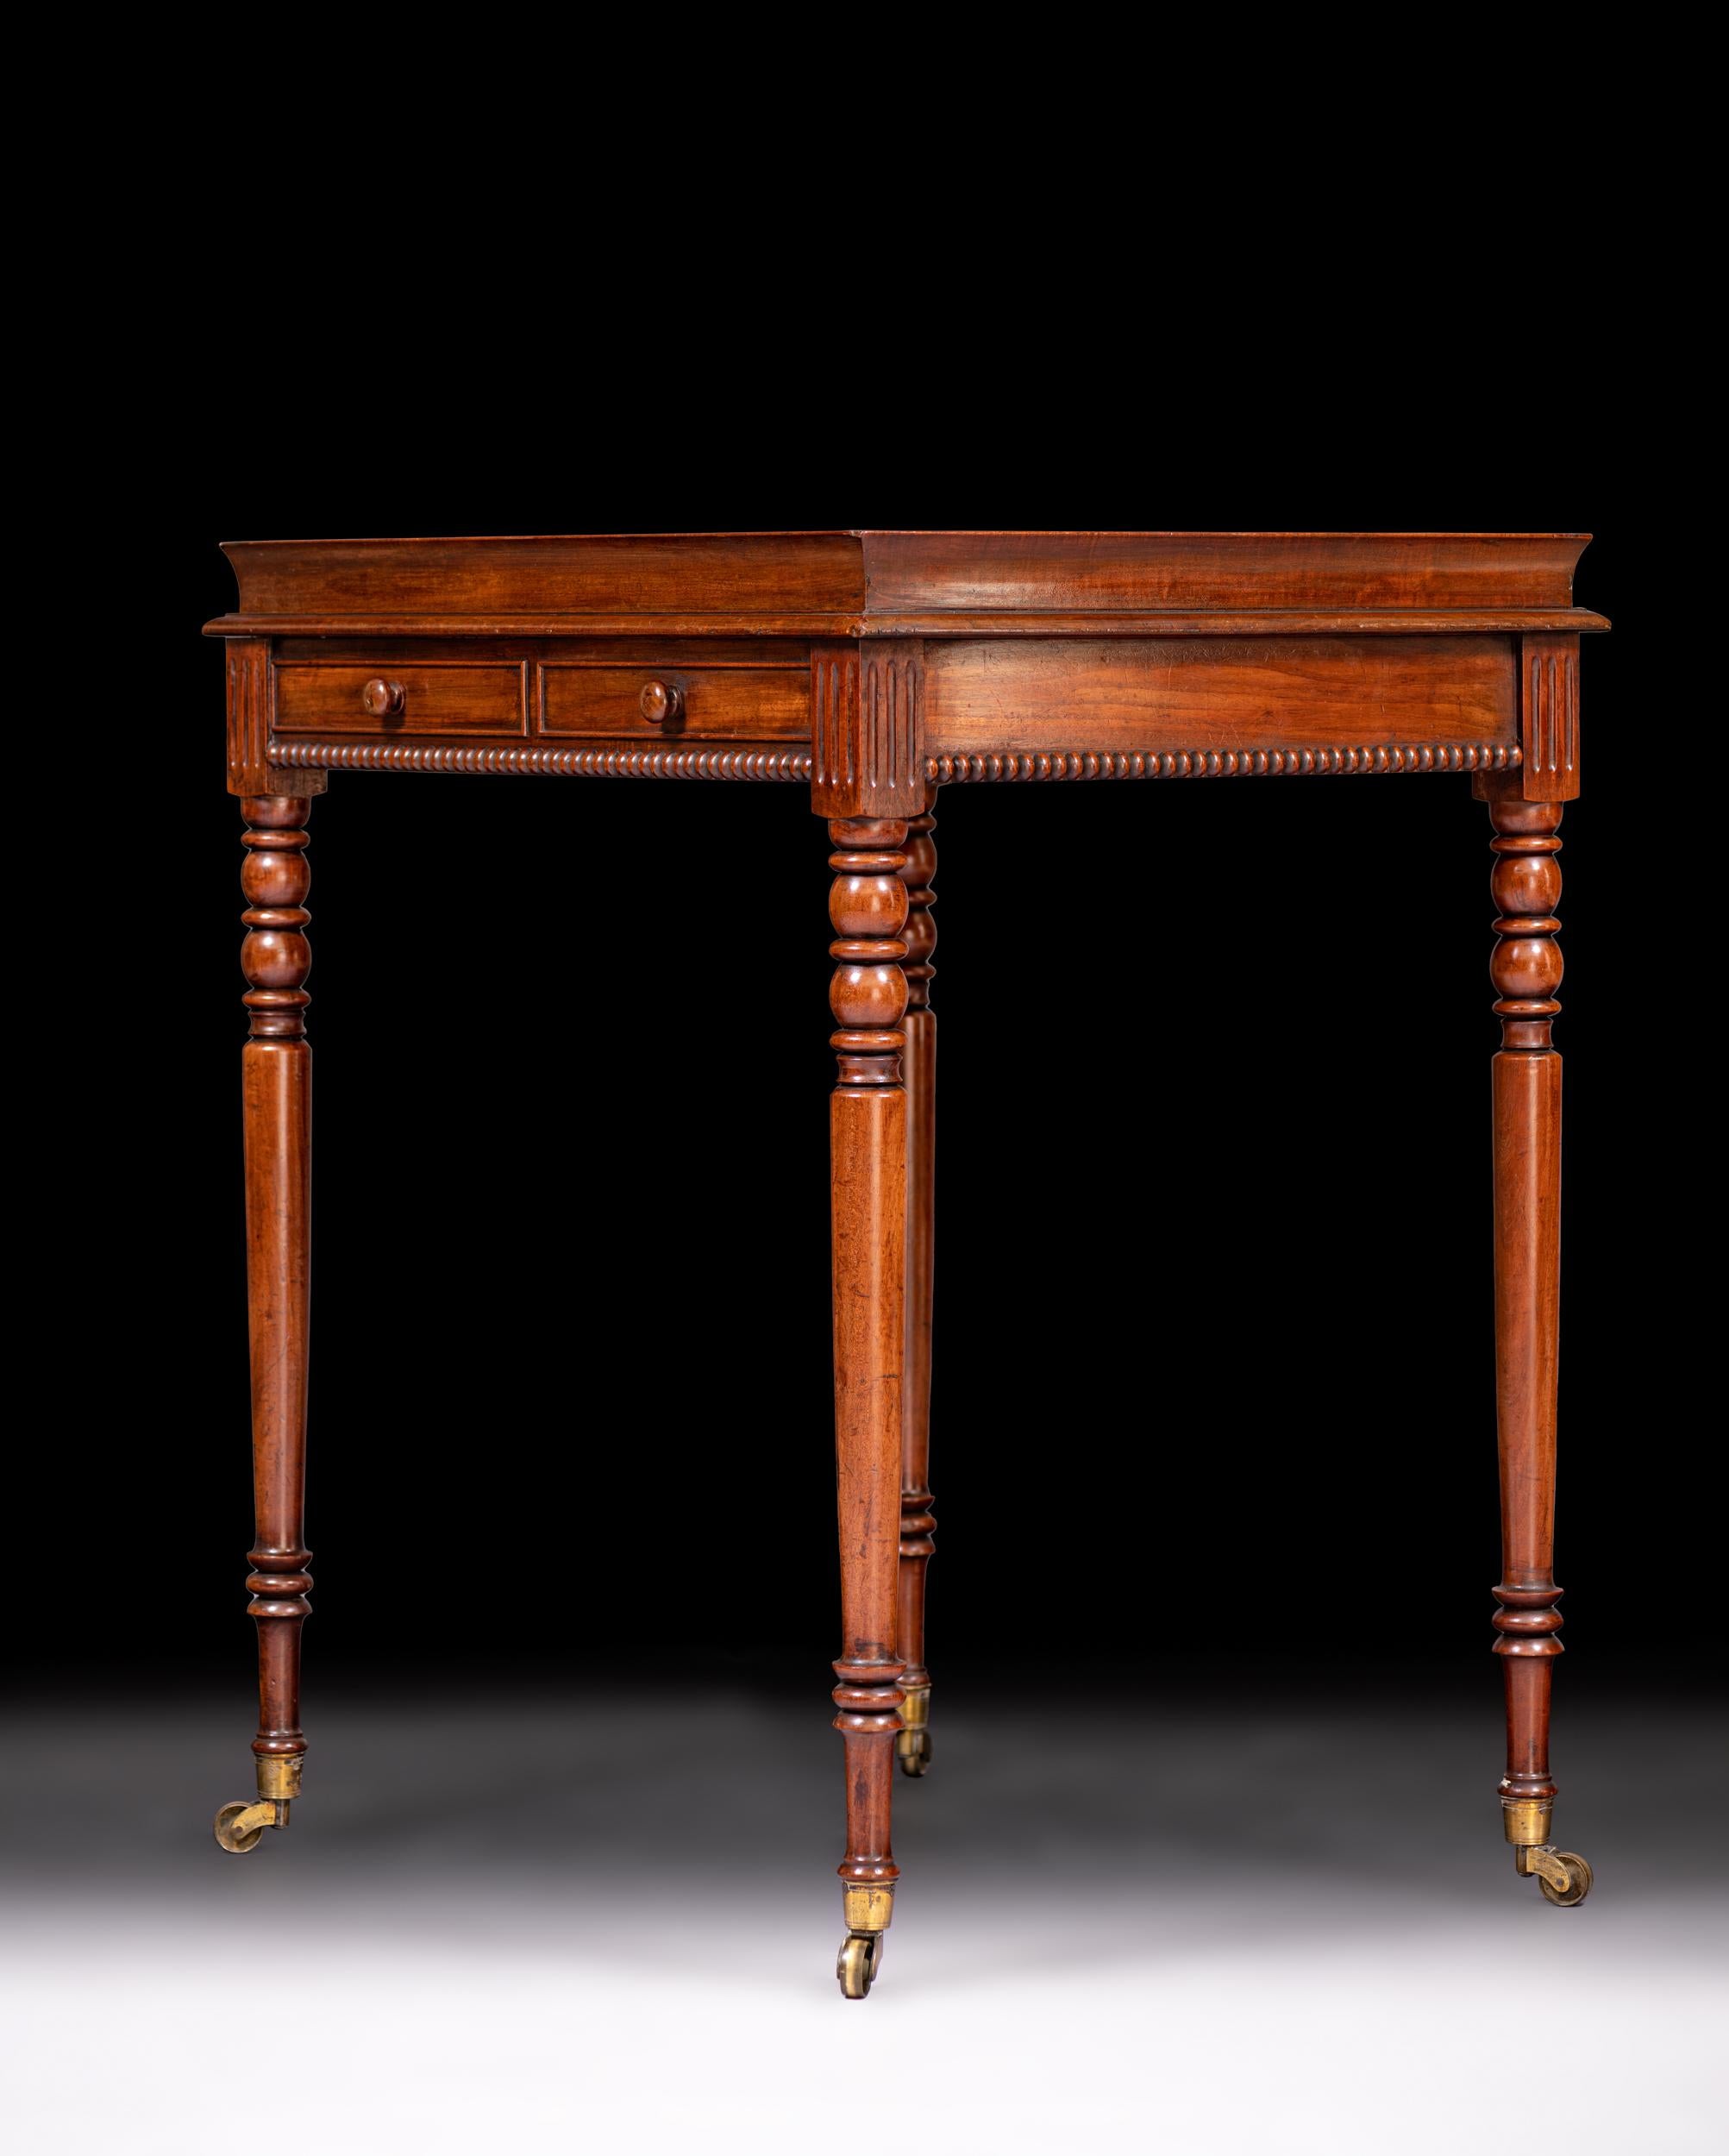 Early 19th Century English Regency Side Table Attributed to Gillows of Lancaster For Sale 1